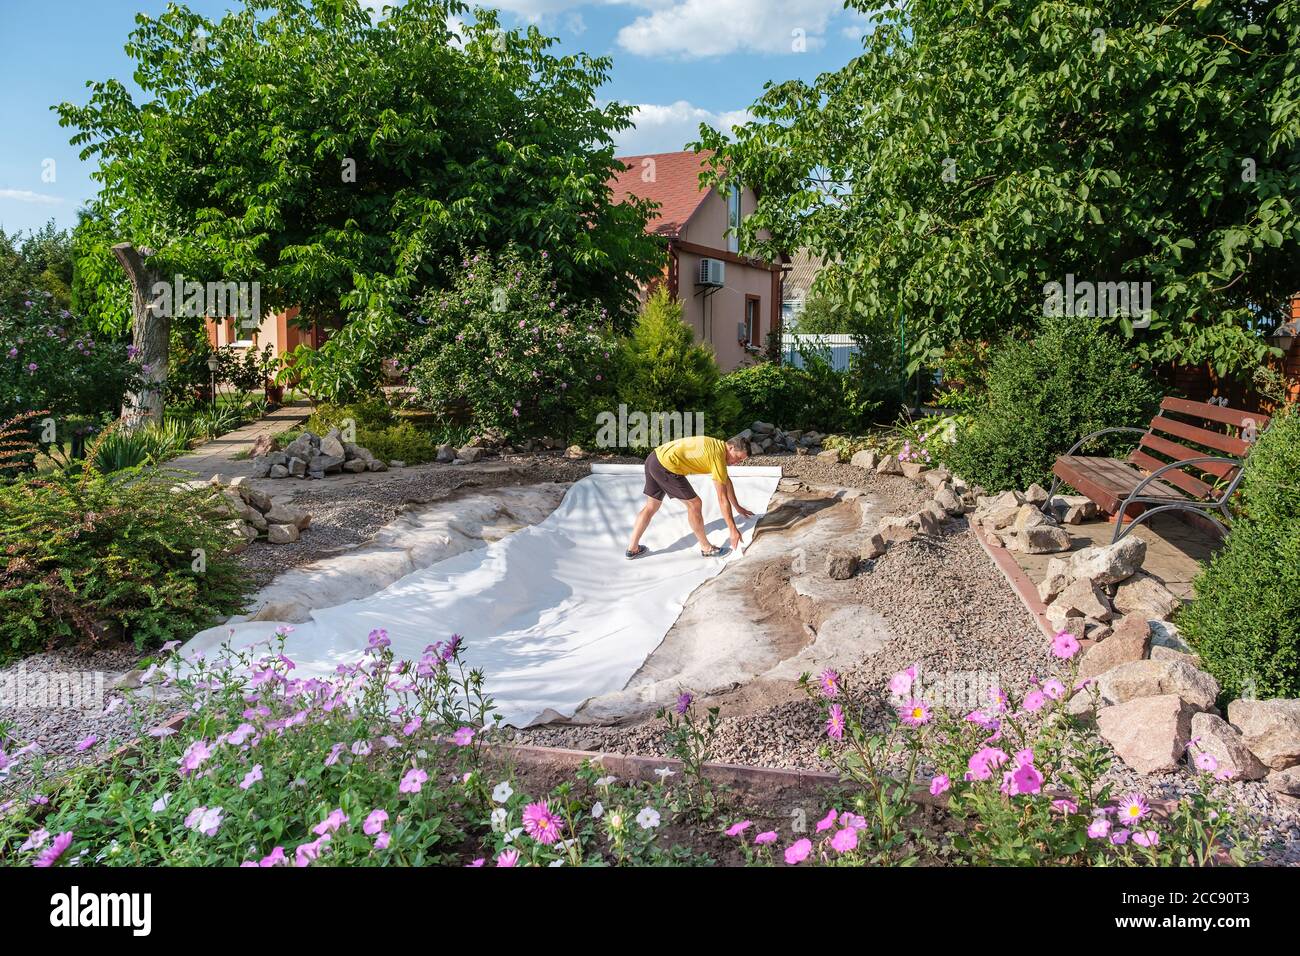 man roll out a roll of white non-woven geotextile fabric to set up fish pond Stock Photo